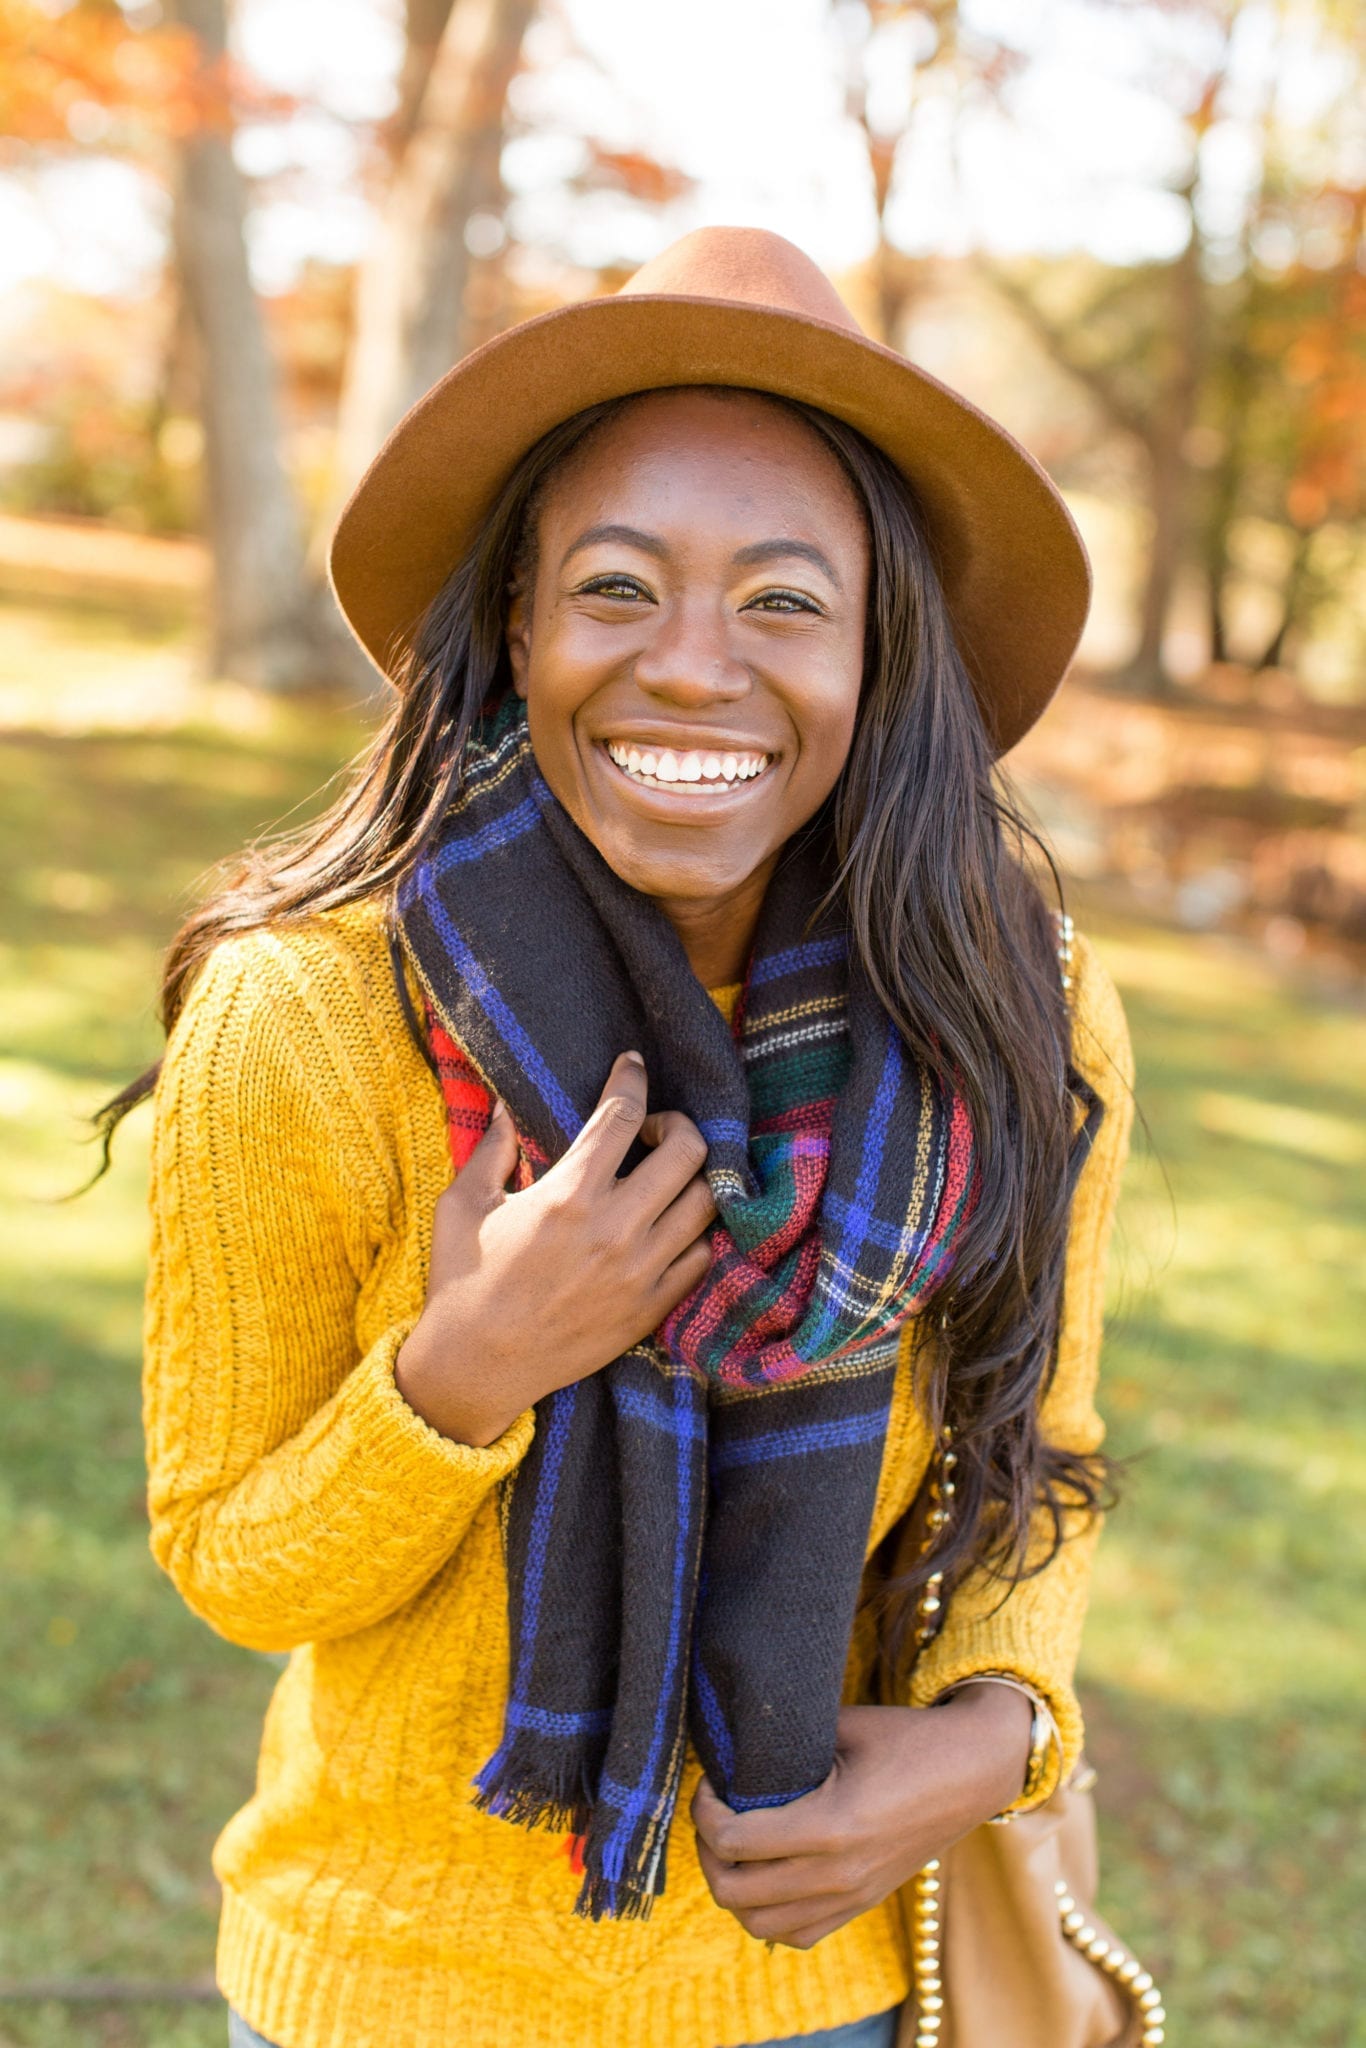 Wondering what to wear for thanksgiving this year? I'm partnering with Old Navy to share my favorite casual outfit ideas! Check out these looks on the blog! // Shot at Furman Univeristy by Southern Fashion + Lifestlye Blogger, GoodTomiCha